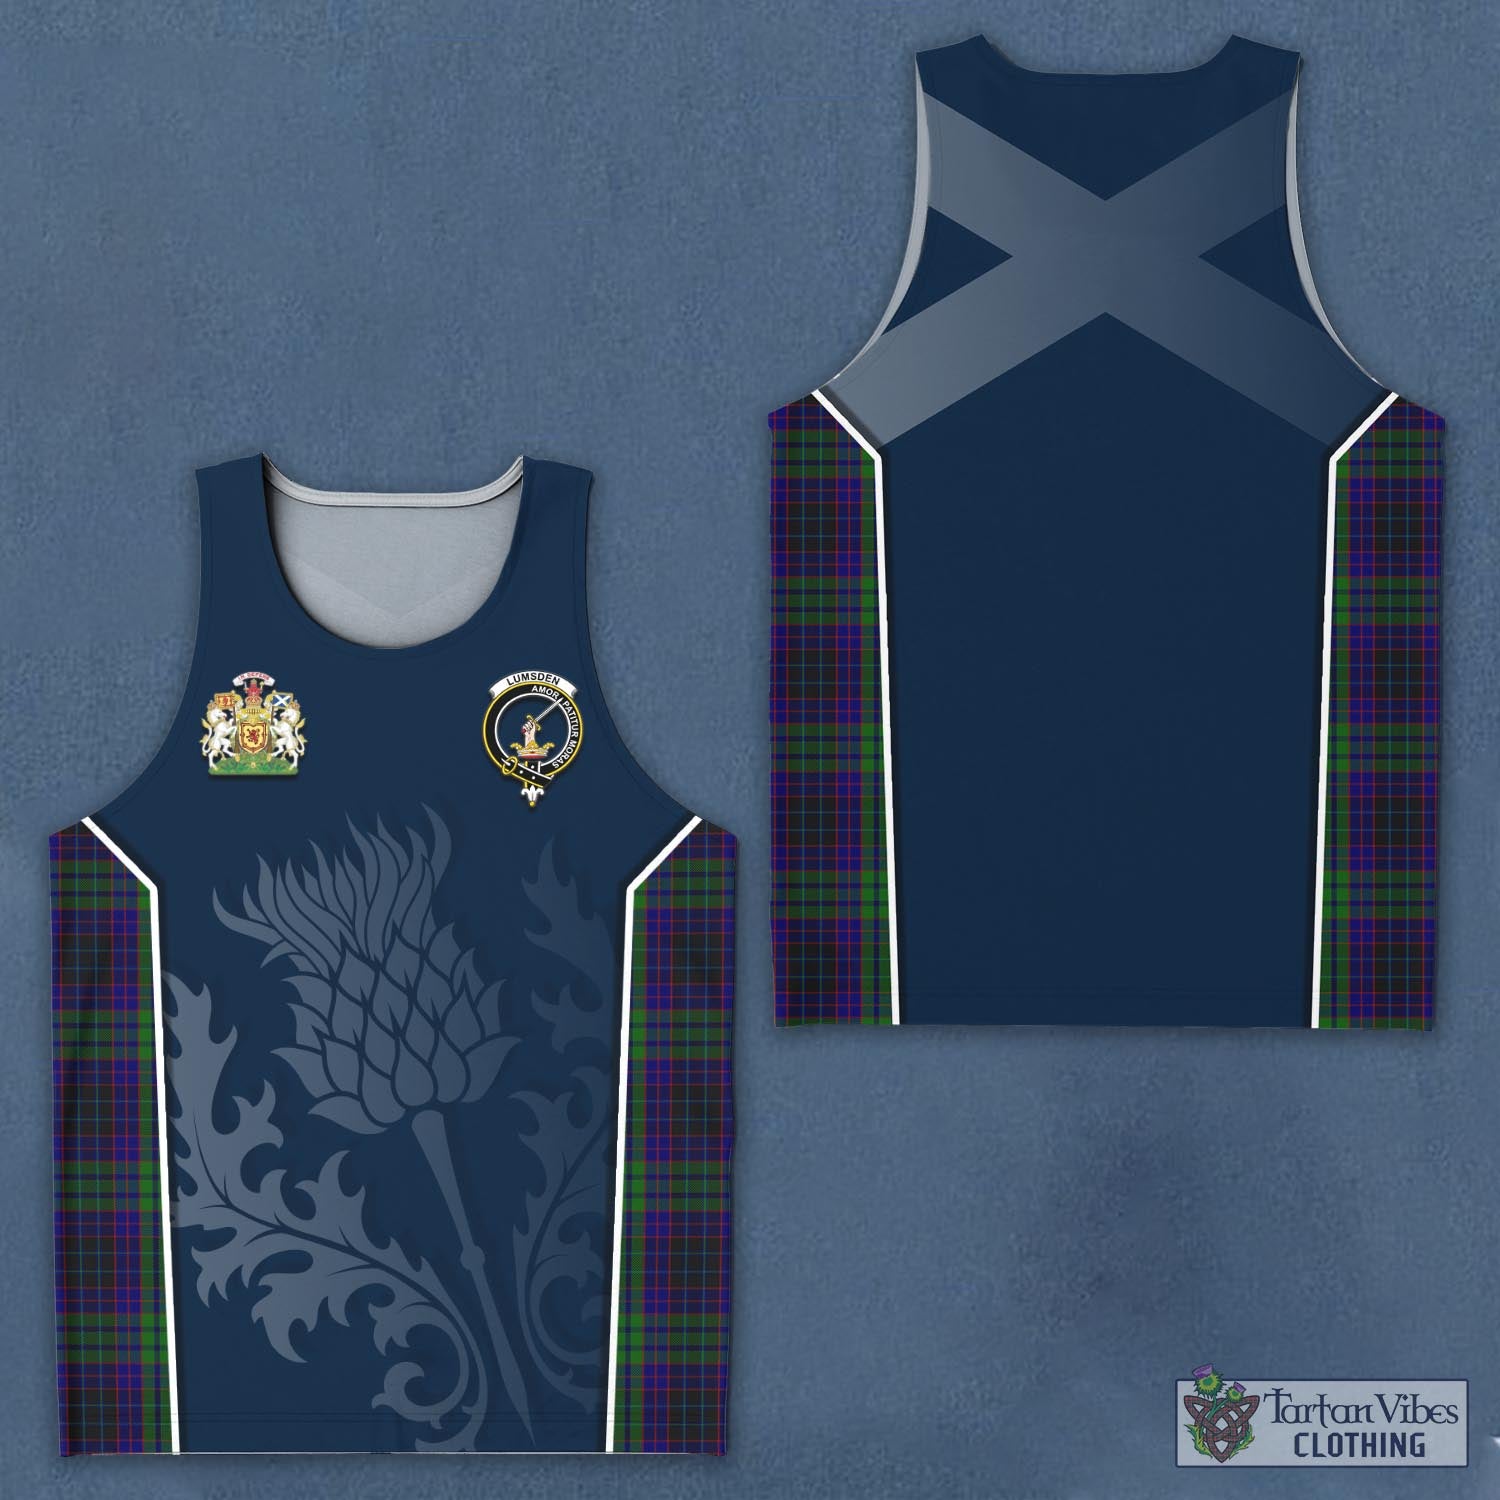 Tartan Vibes Clothing Lumsden Green Tartan Men's Tanks Top with Family Crest and Scottish Thistle Vibes Sport Style